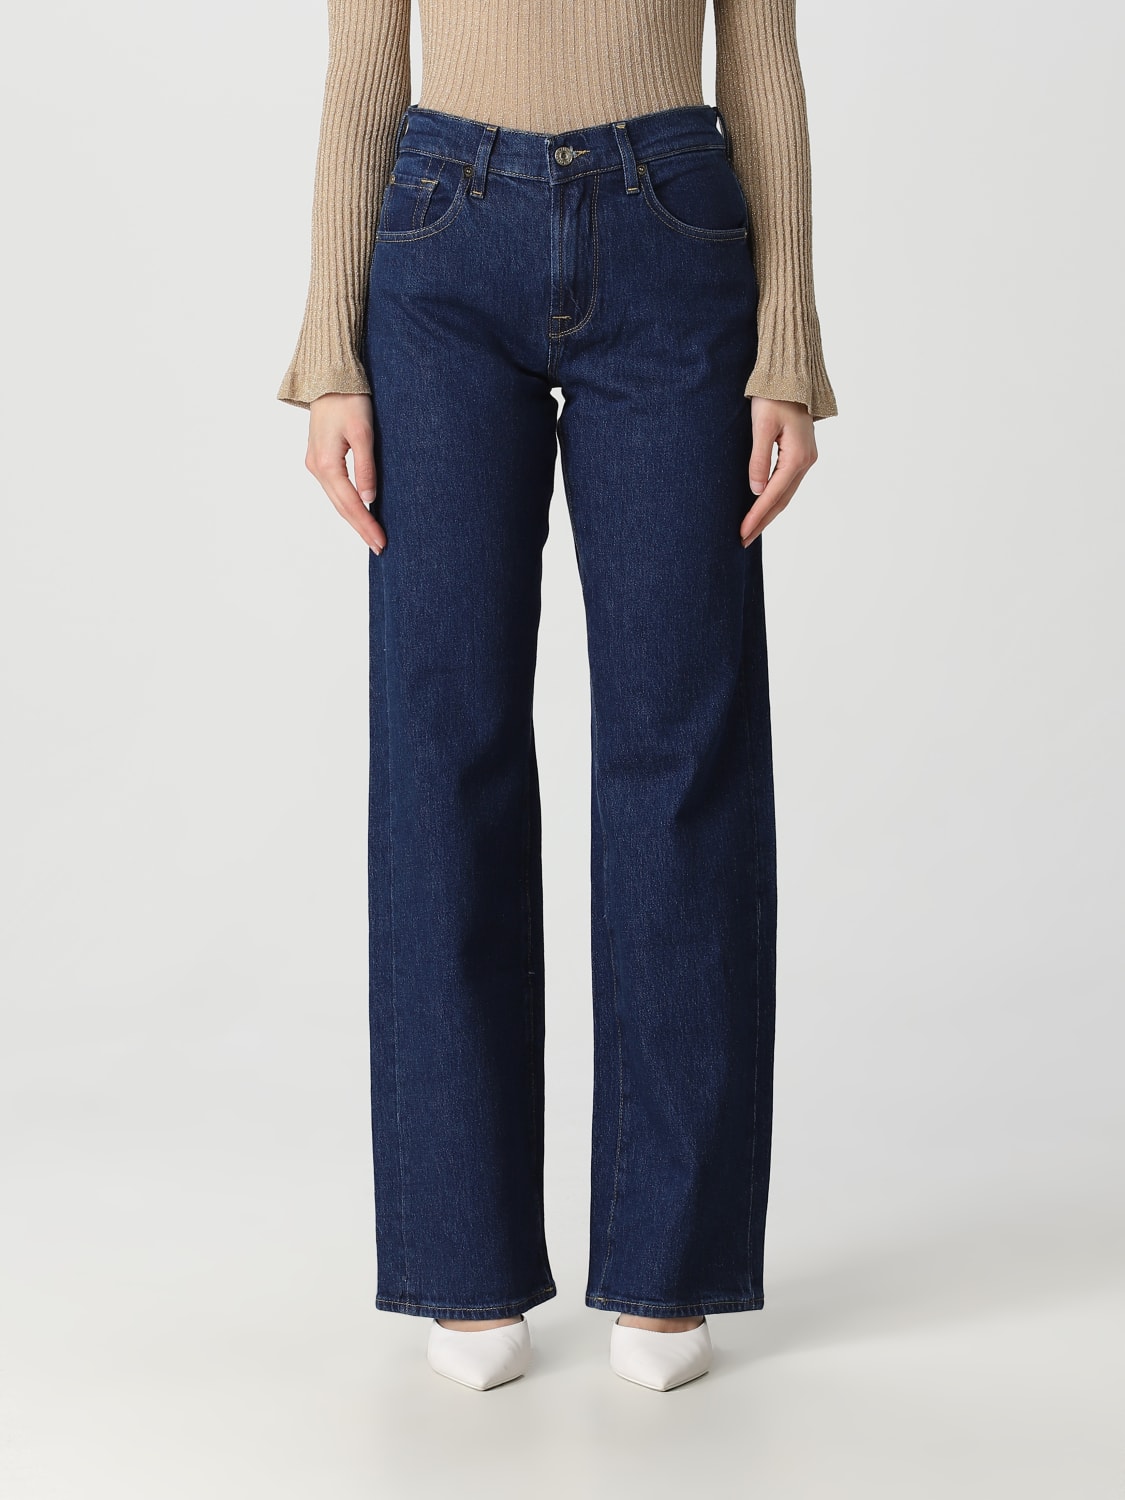 7 For All Outlet: jeans for women - Blue | 7 All Mankind jeans JSSTC650DD online at GIGLIO.COM